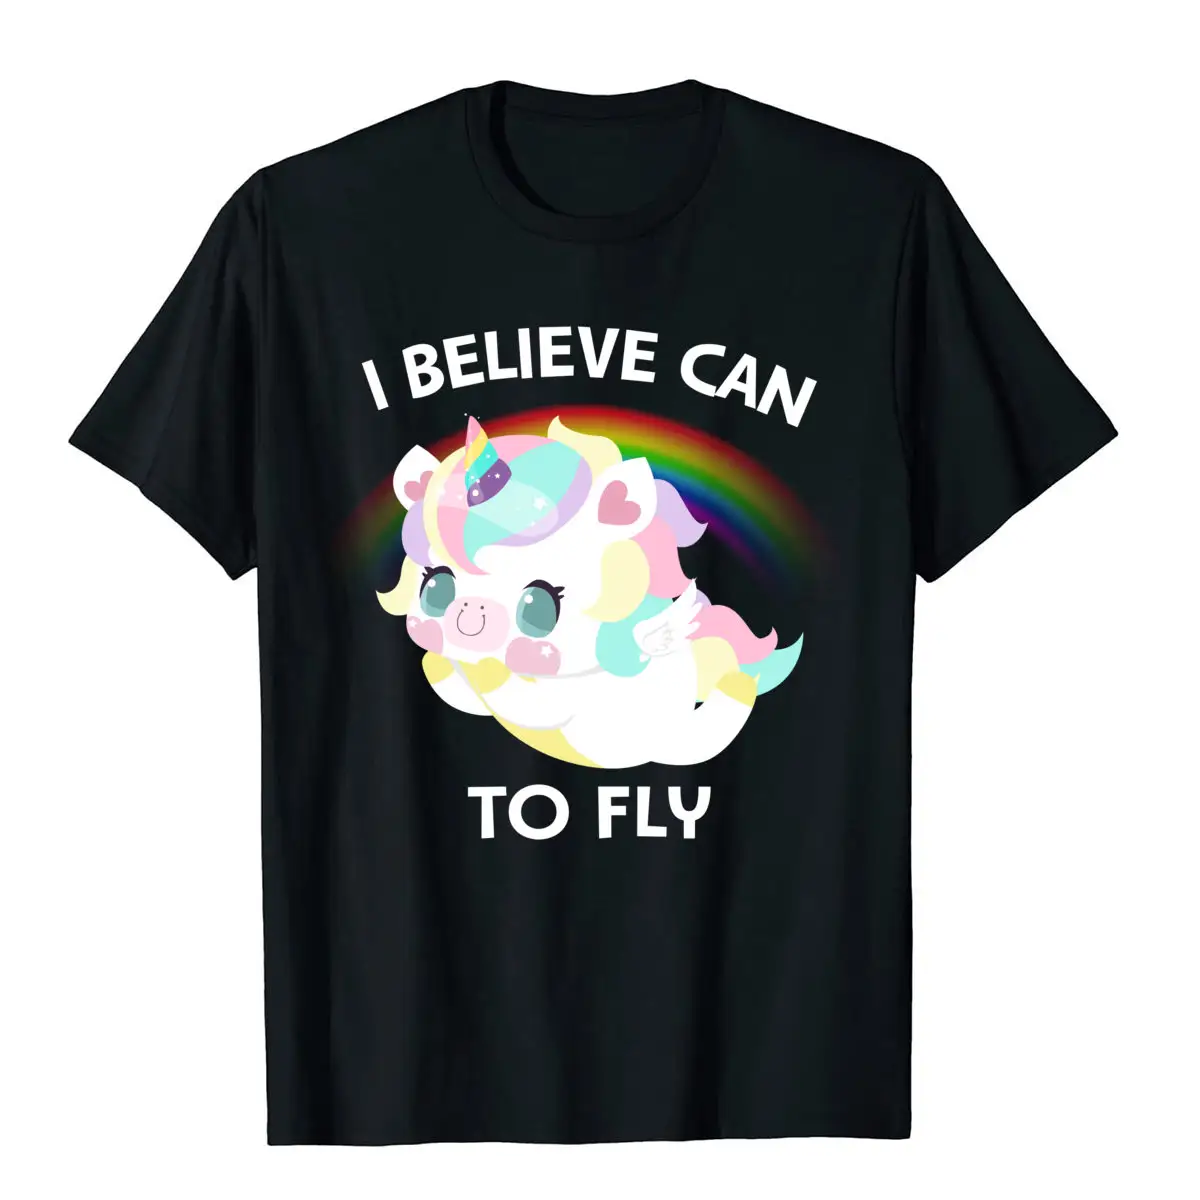 Cute Young T-shirt Cotton I Believe Can To Fly Tops & Tees Moto Biker personalizza la maglietta stampata